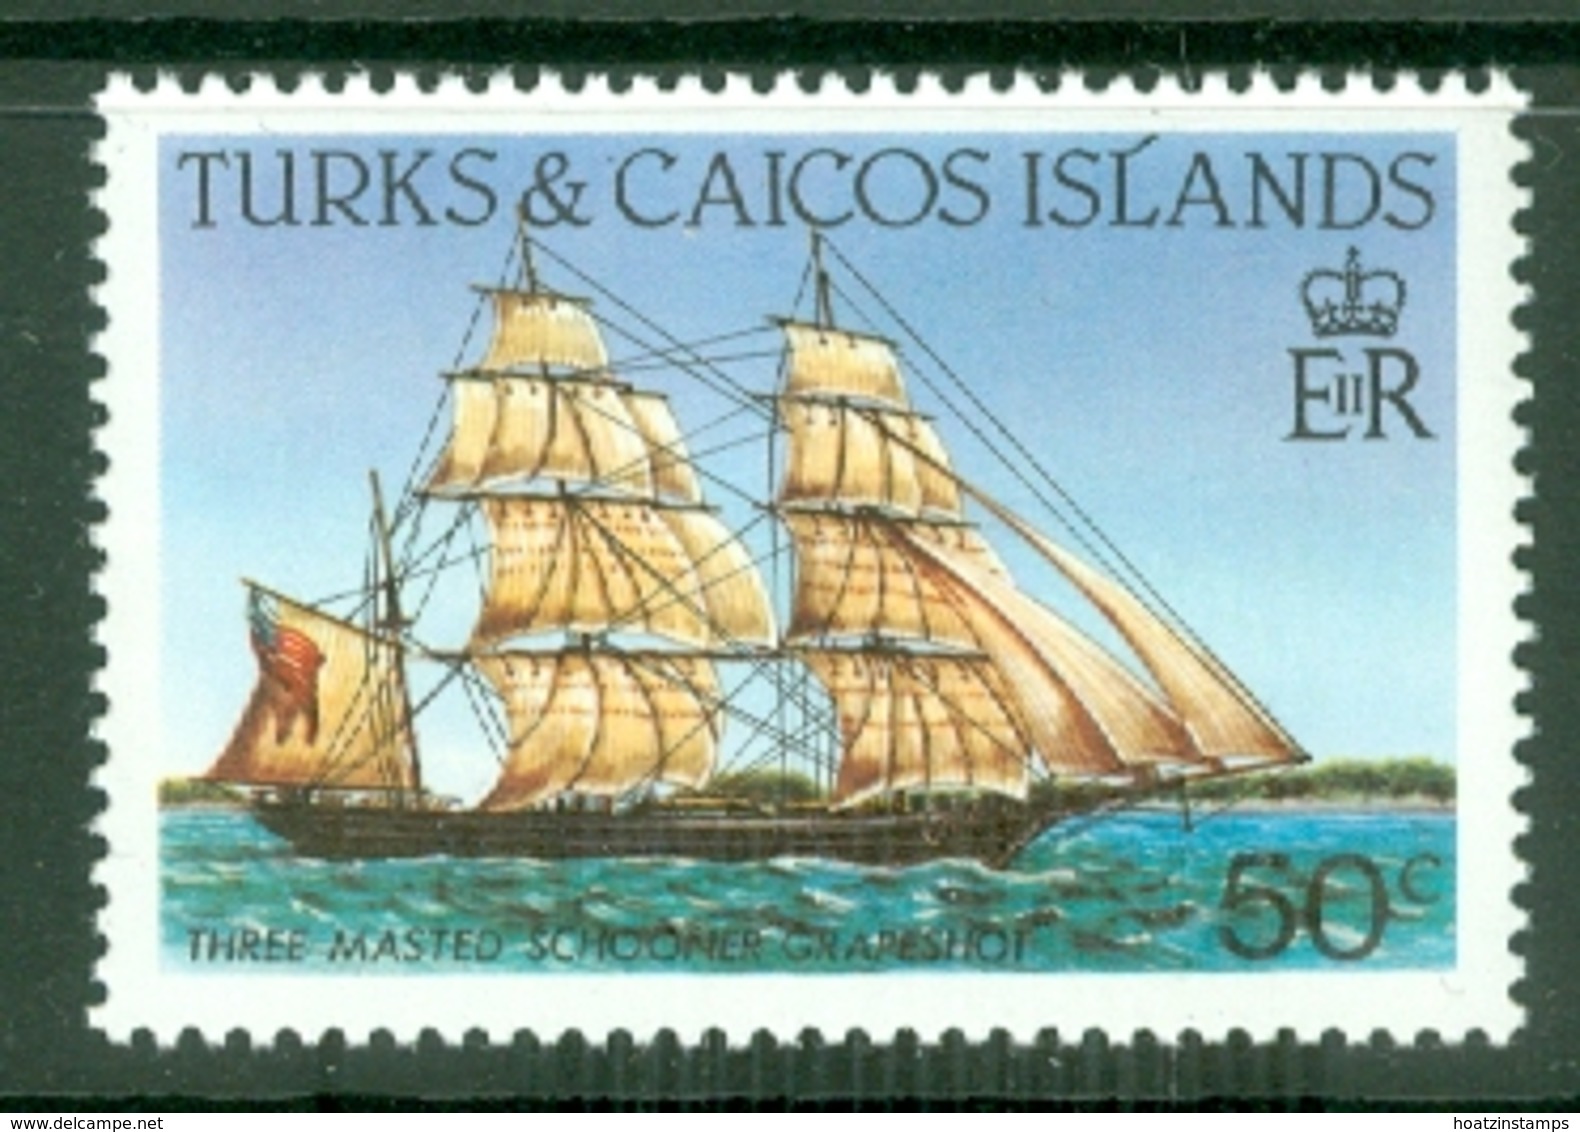 Turks & Caicos Is: 1983/85   Ships   SG777    50c  [Perf: 14]  MNH - Turks And Caicos